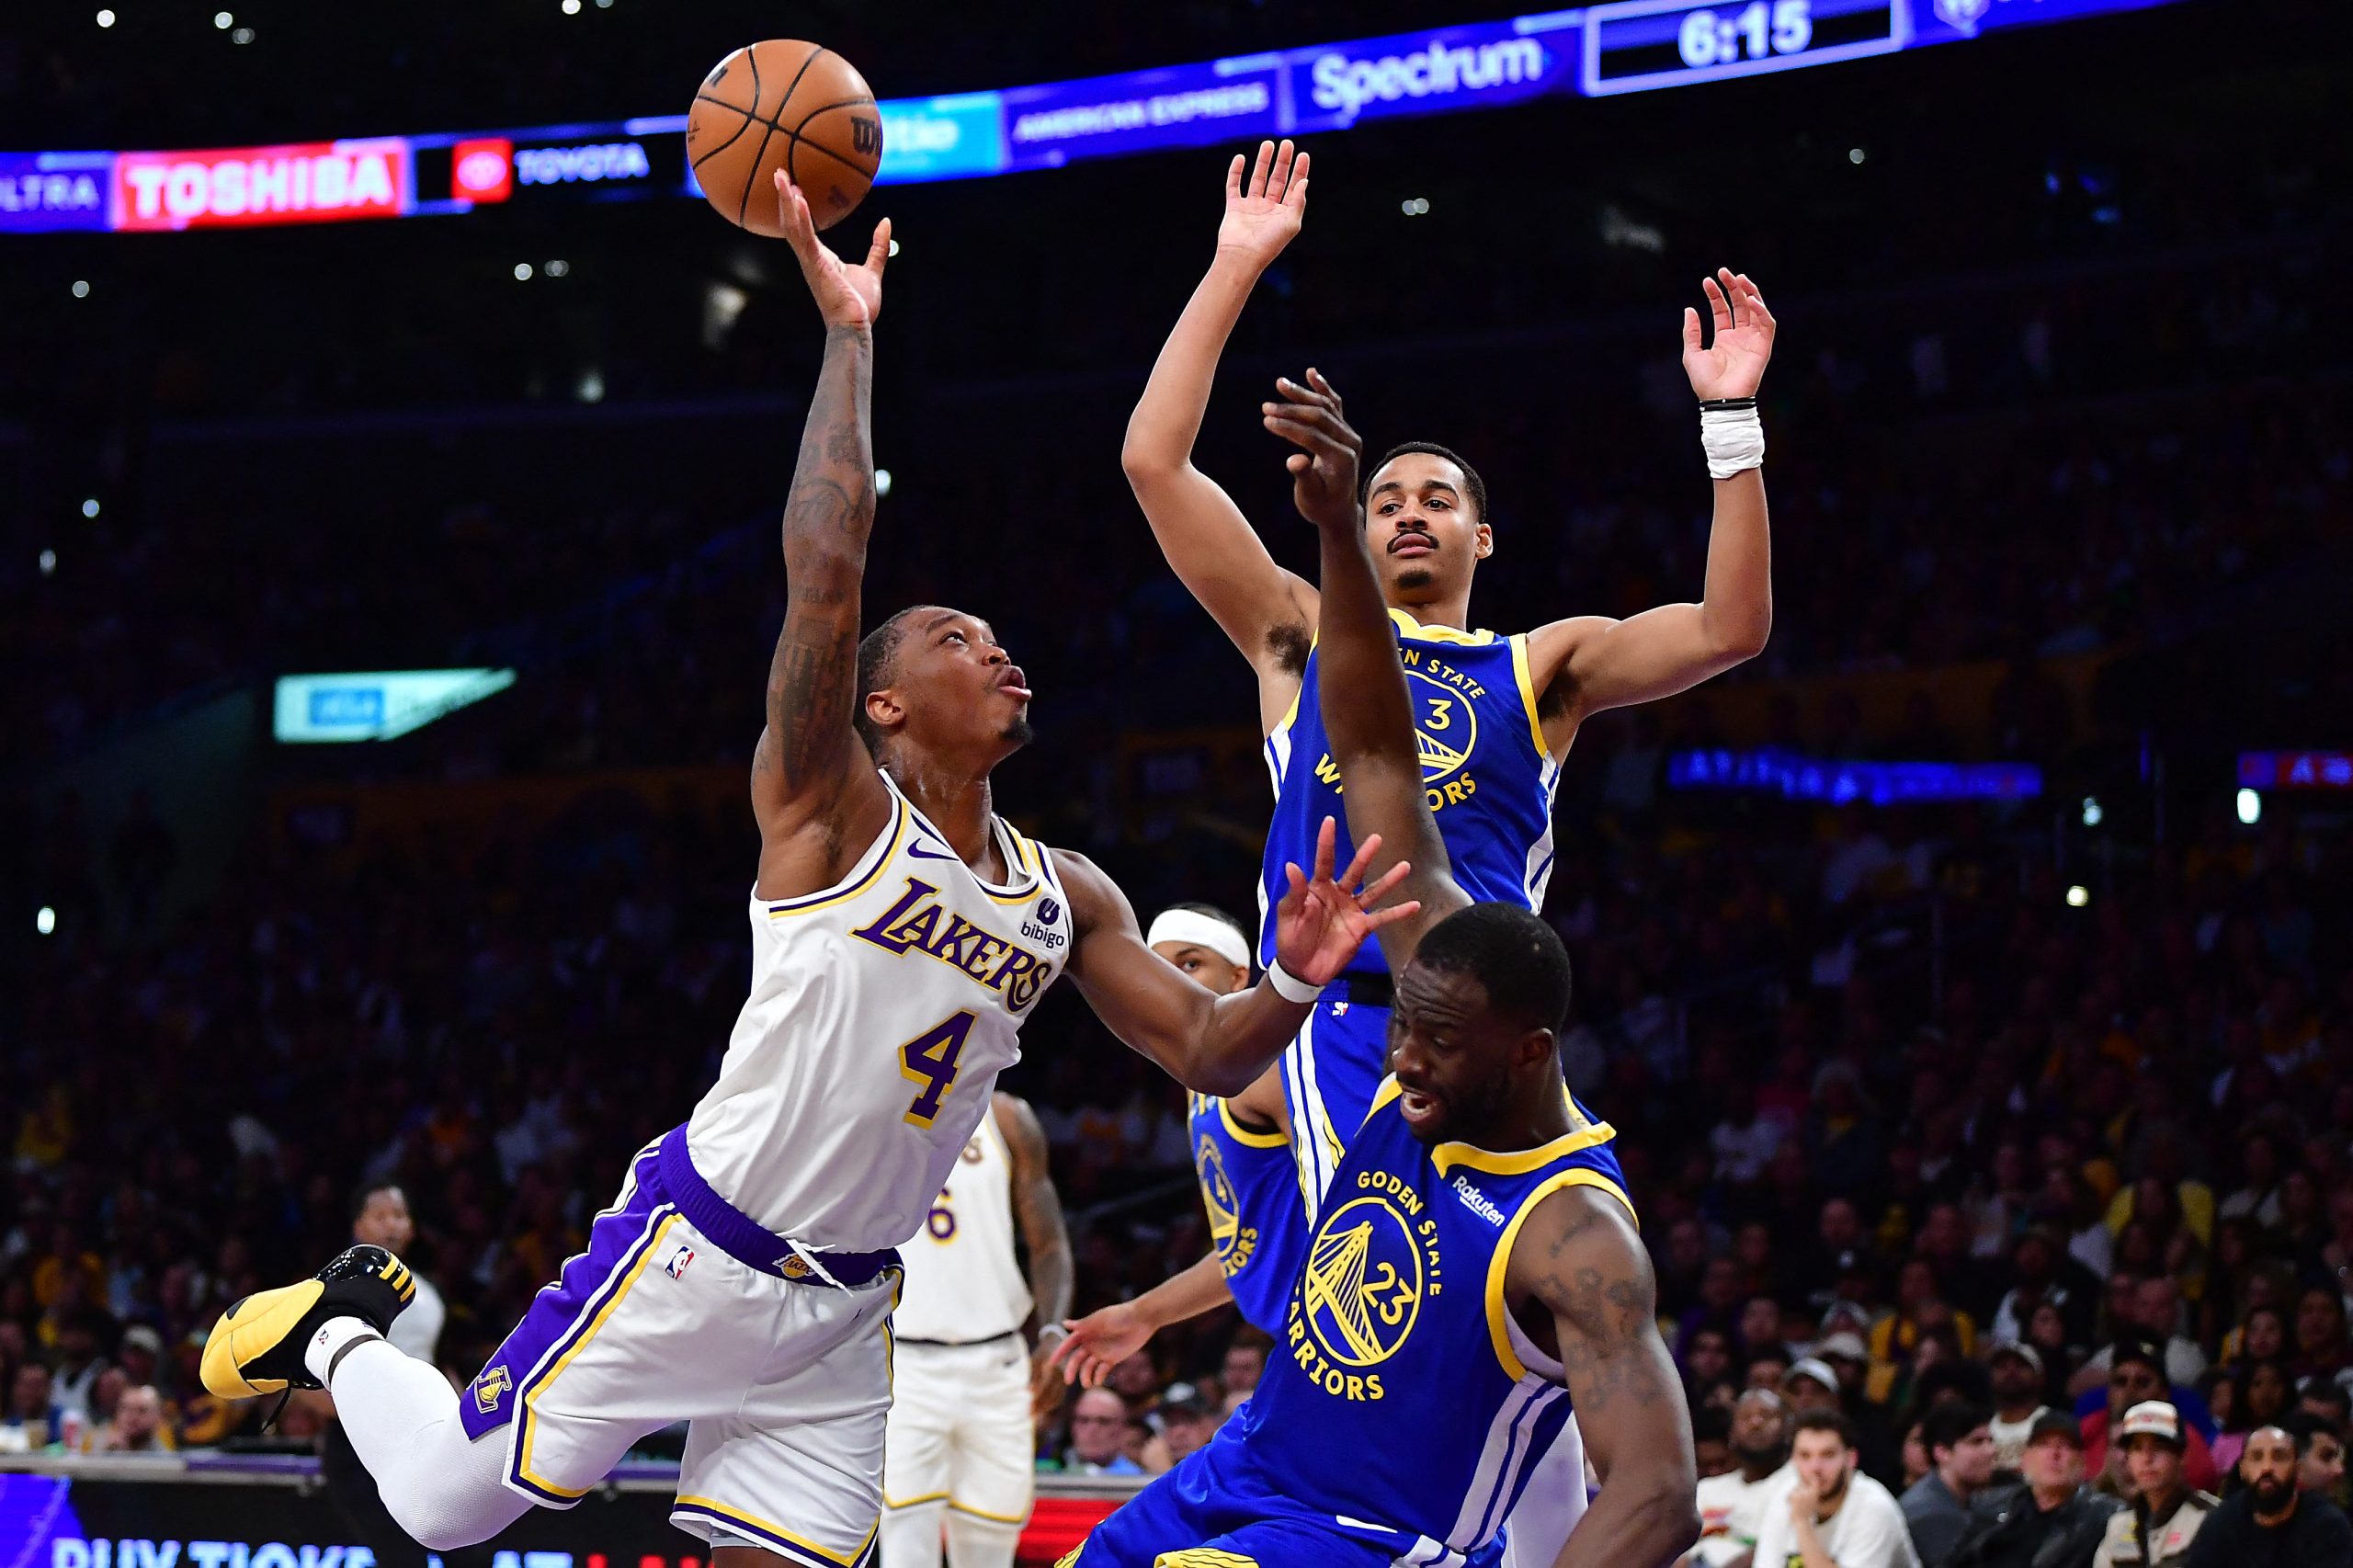 May 6, 2023; Los Angeles, California, USA; Los Angeles Lakers guard Lonnie Walker IV (4) shoots against Golden State Warriors guard Jordan Poole (3) and forward Draymond Green (23) during the first half in game three of the 2023 NBA playoffs at Crypto.com Arena. Mandatory Credit: Gary A. Vasquez-USA TODAY Sports Photo: Gary A. Vasquez/REUTERS